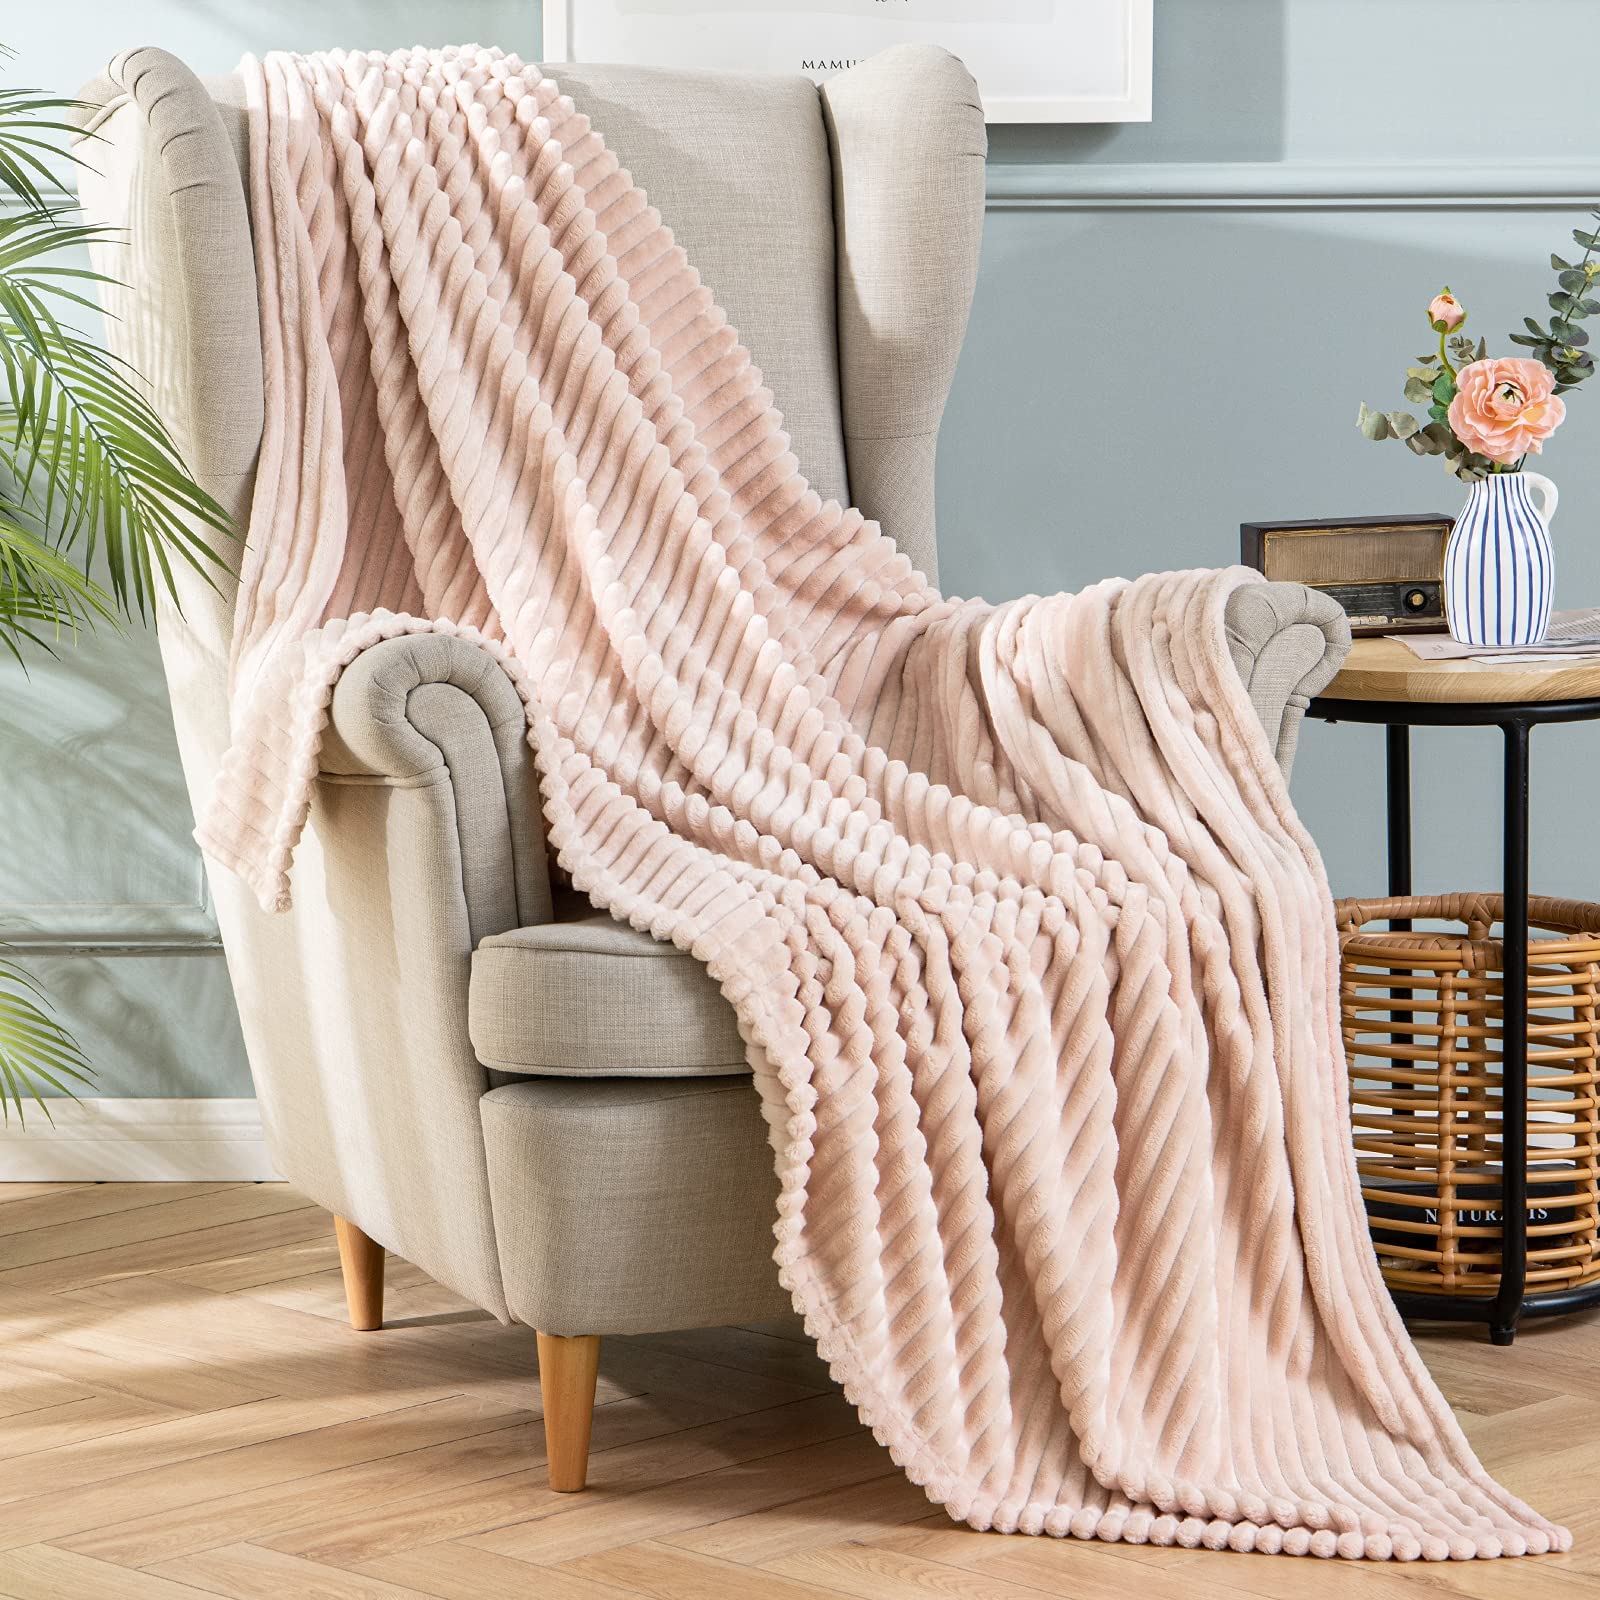 Buy MIULEE Fleece Throw Blanket for Couch 300GSM Super Soft